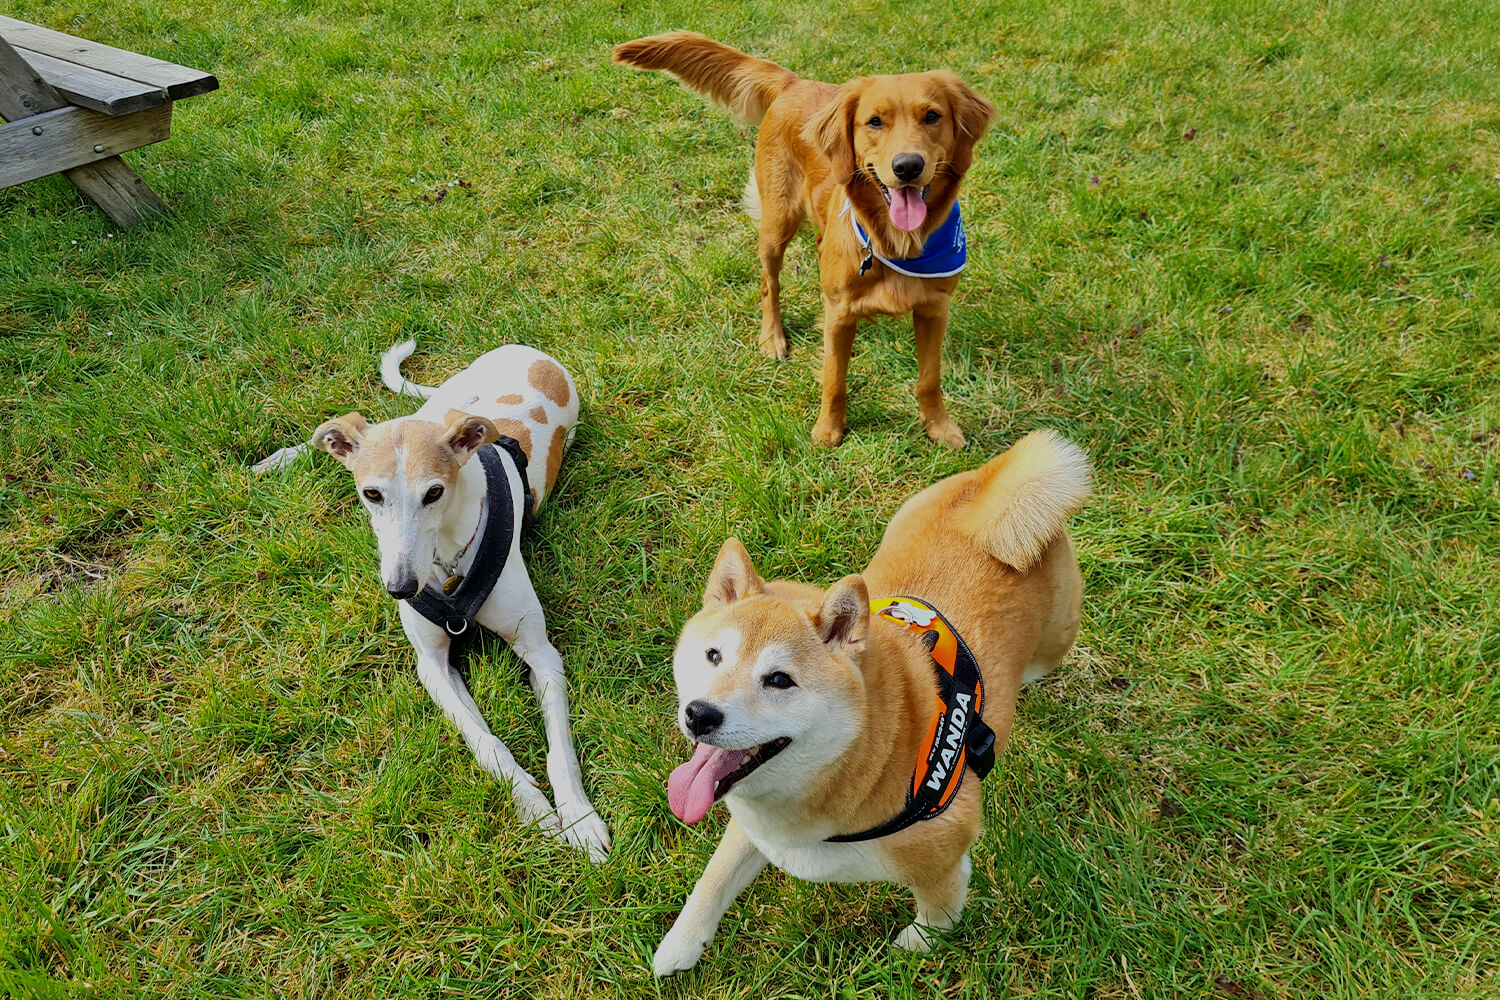 Three dogs looking happy on grass.